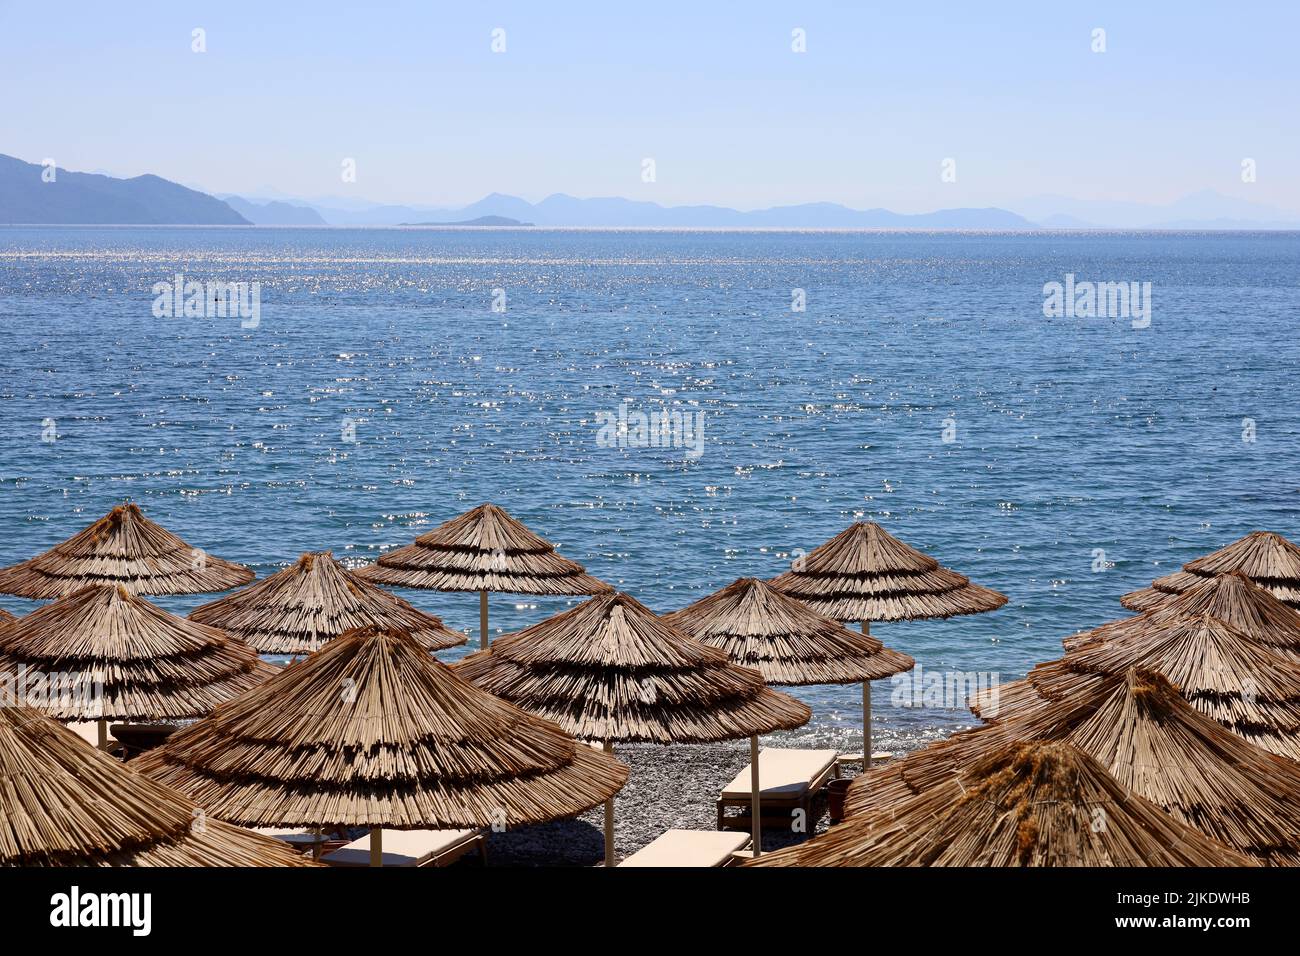 Empty pebble beach with wicker parasols and deck chairs. Picturesque view to blue sea and mountains in mist, luxury summer resort Stock Photo